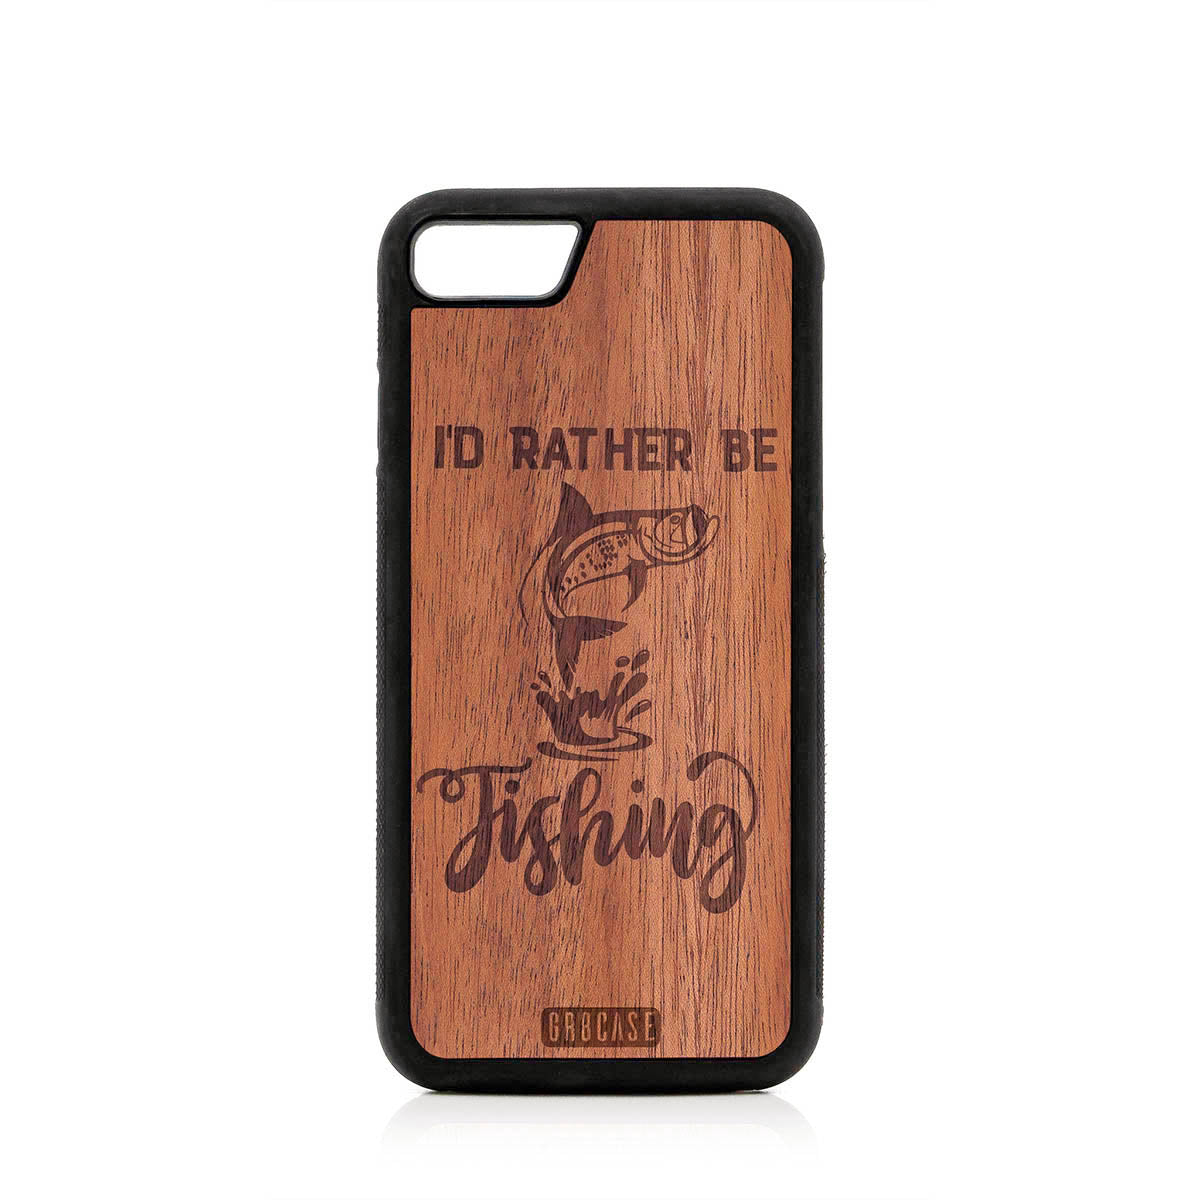 I'D Rather Be Fishing Design Wood Case For iPhone 7/8